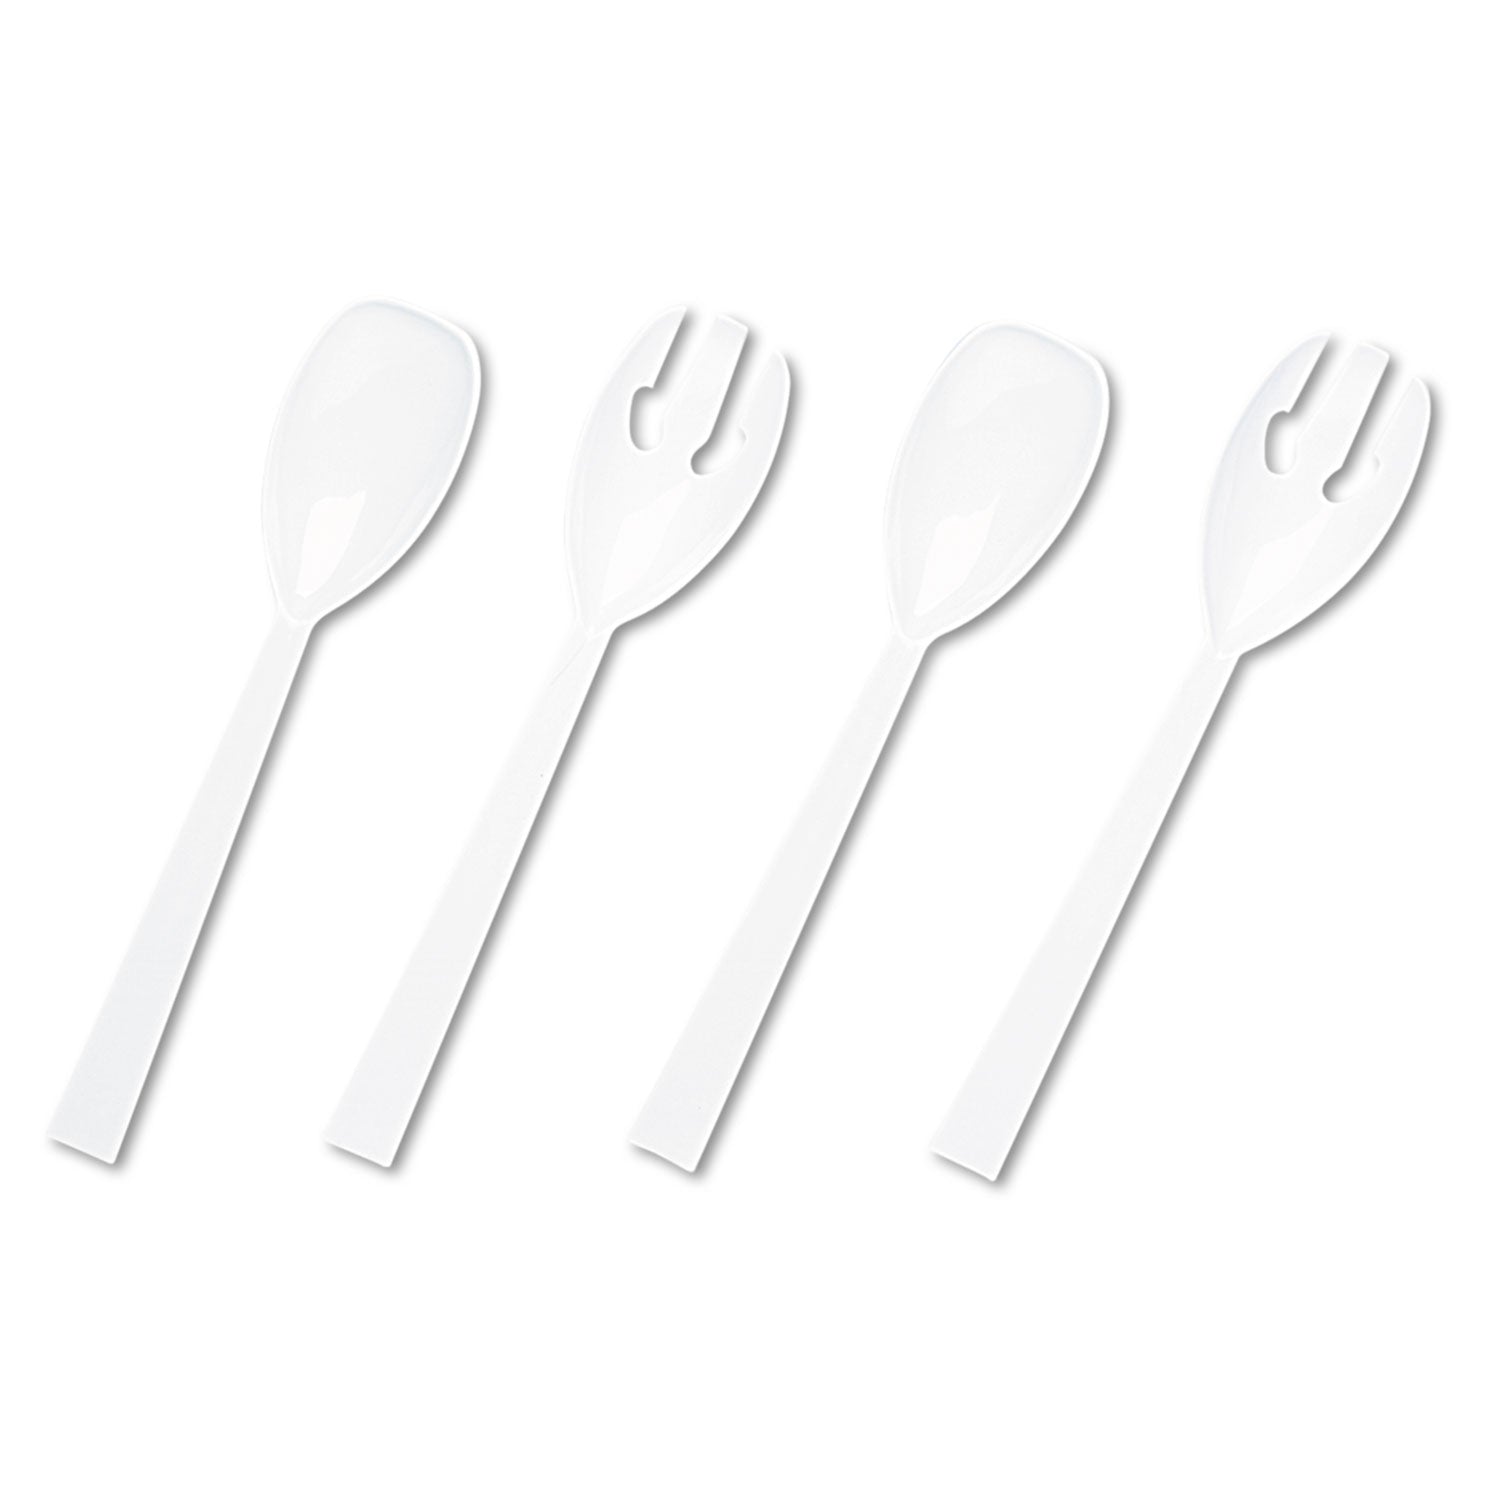 Table Set Plastic Serving Forks and Spoons, White, 24 Forks, 24 Spoons per Pack - 